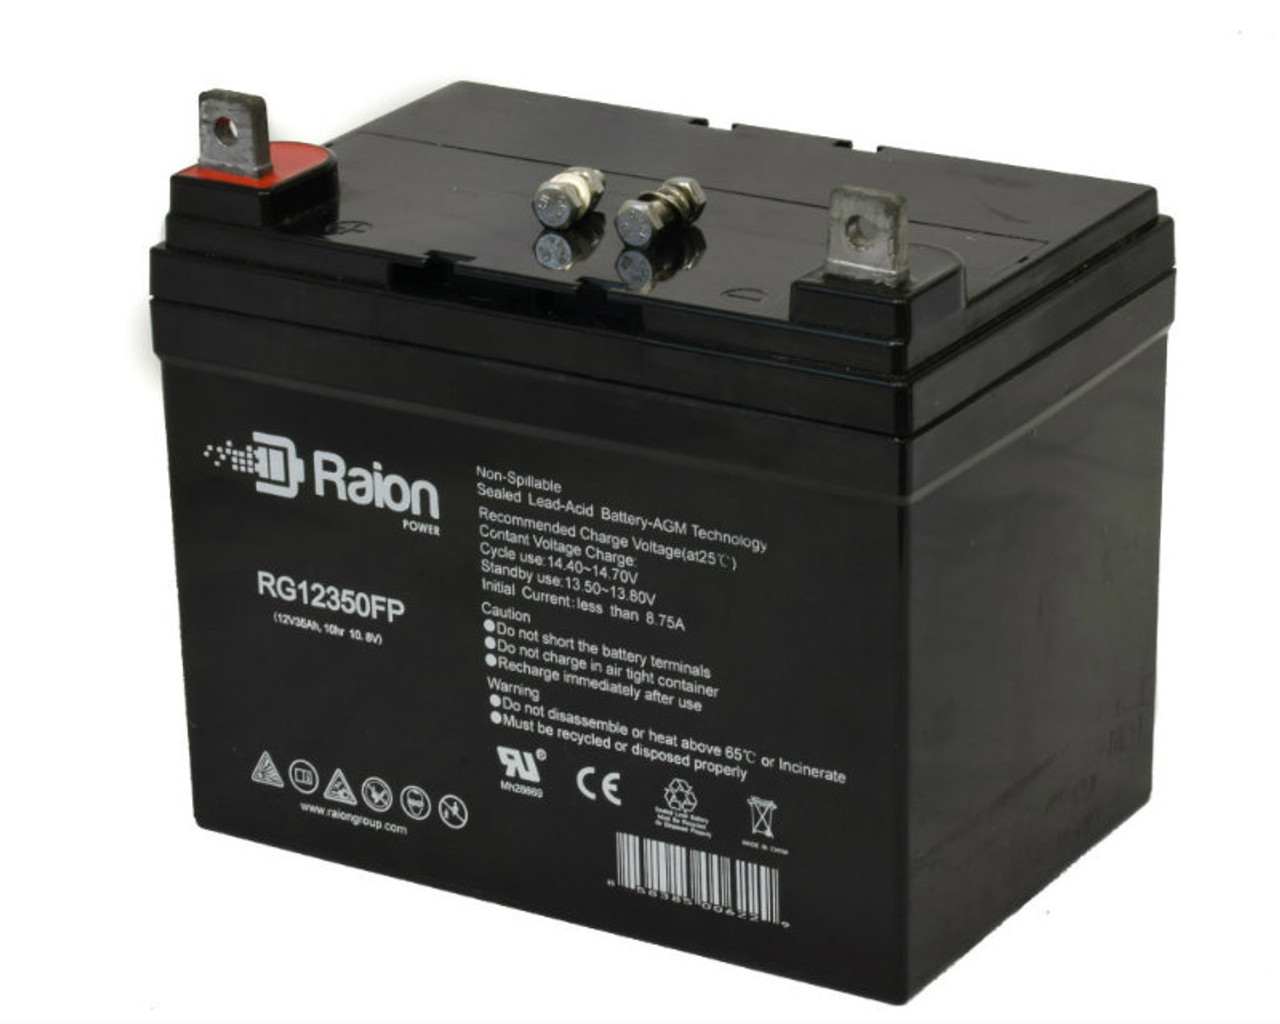 Raion Power Replacement 12V 35Ah Battery for Ihc Cub Garden 149 - 1 Pack